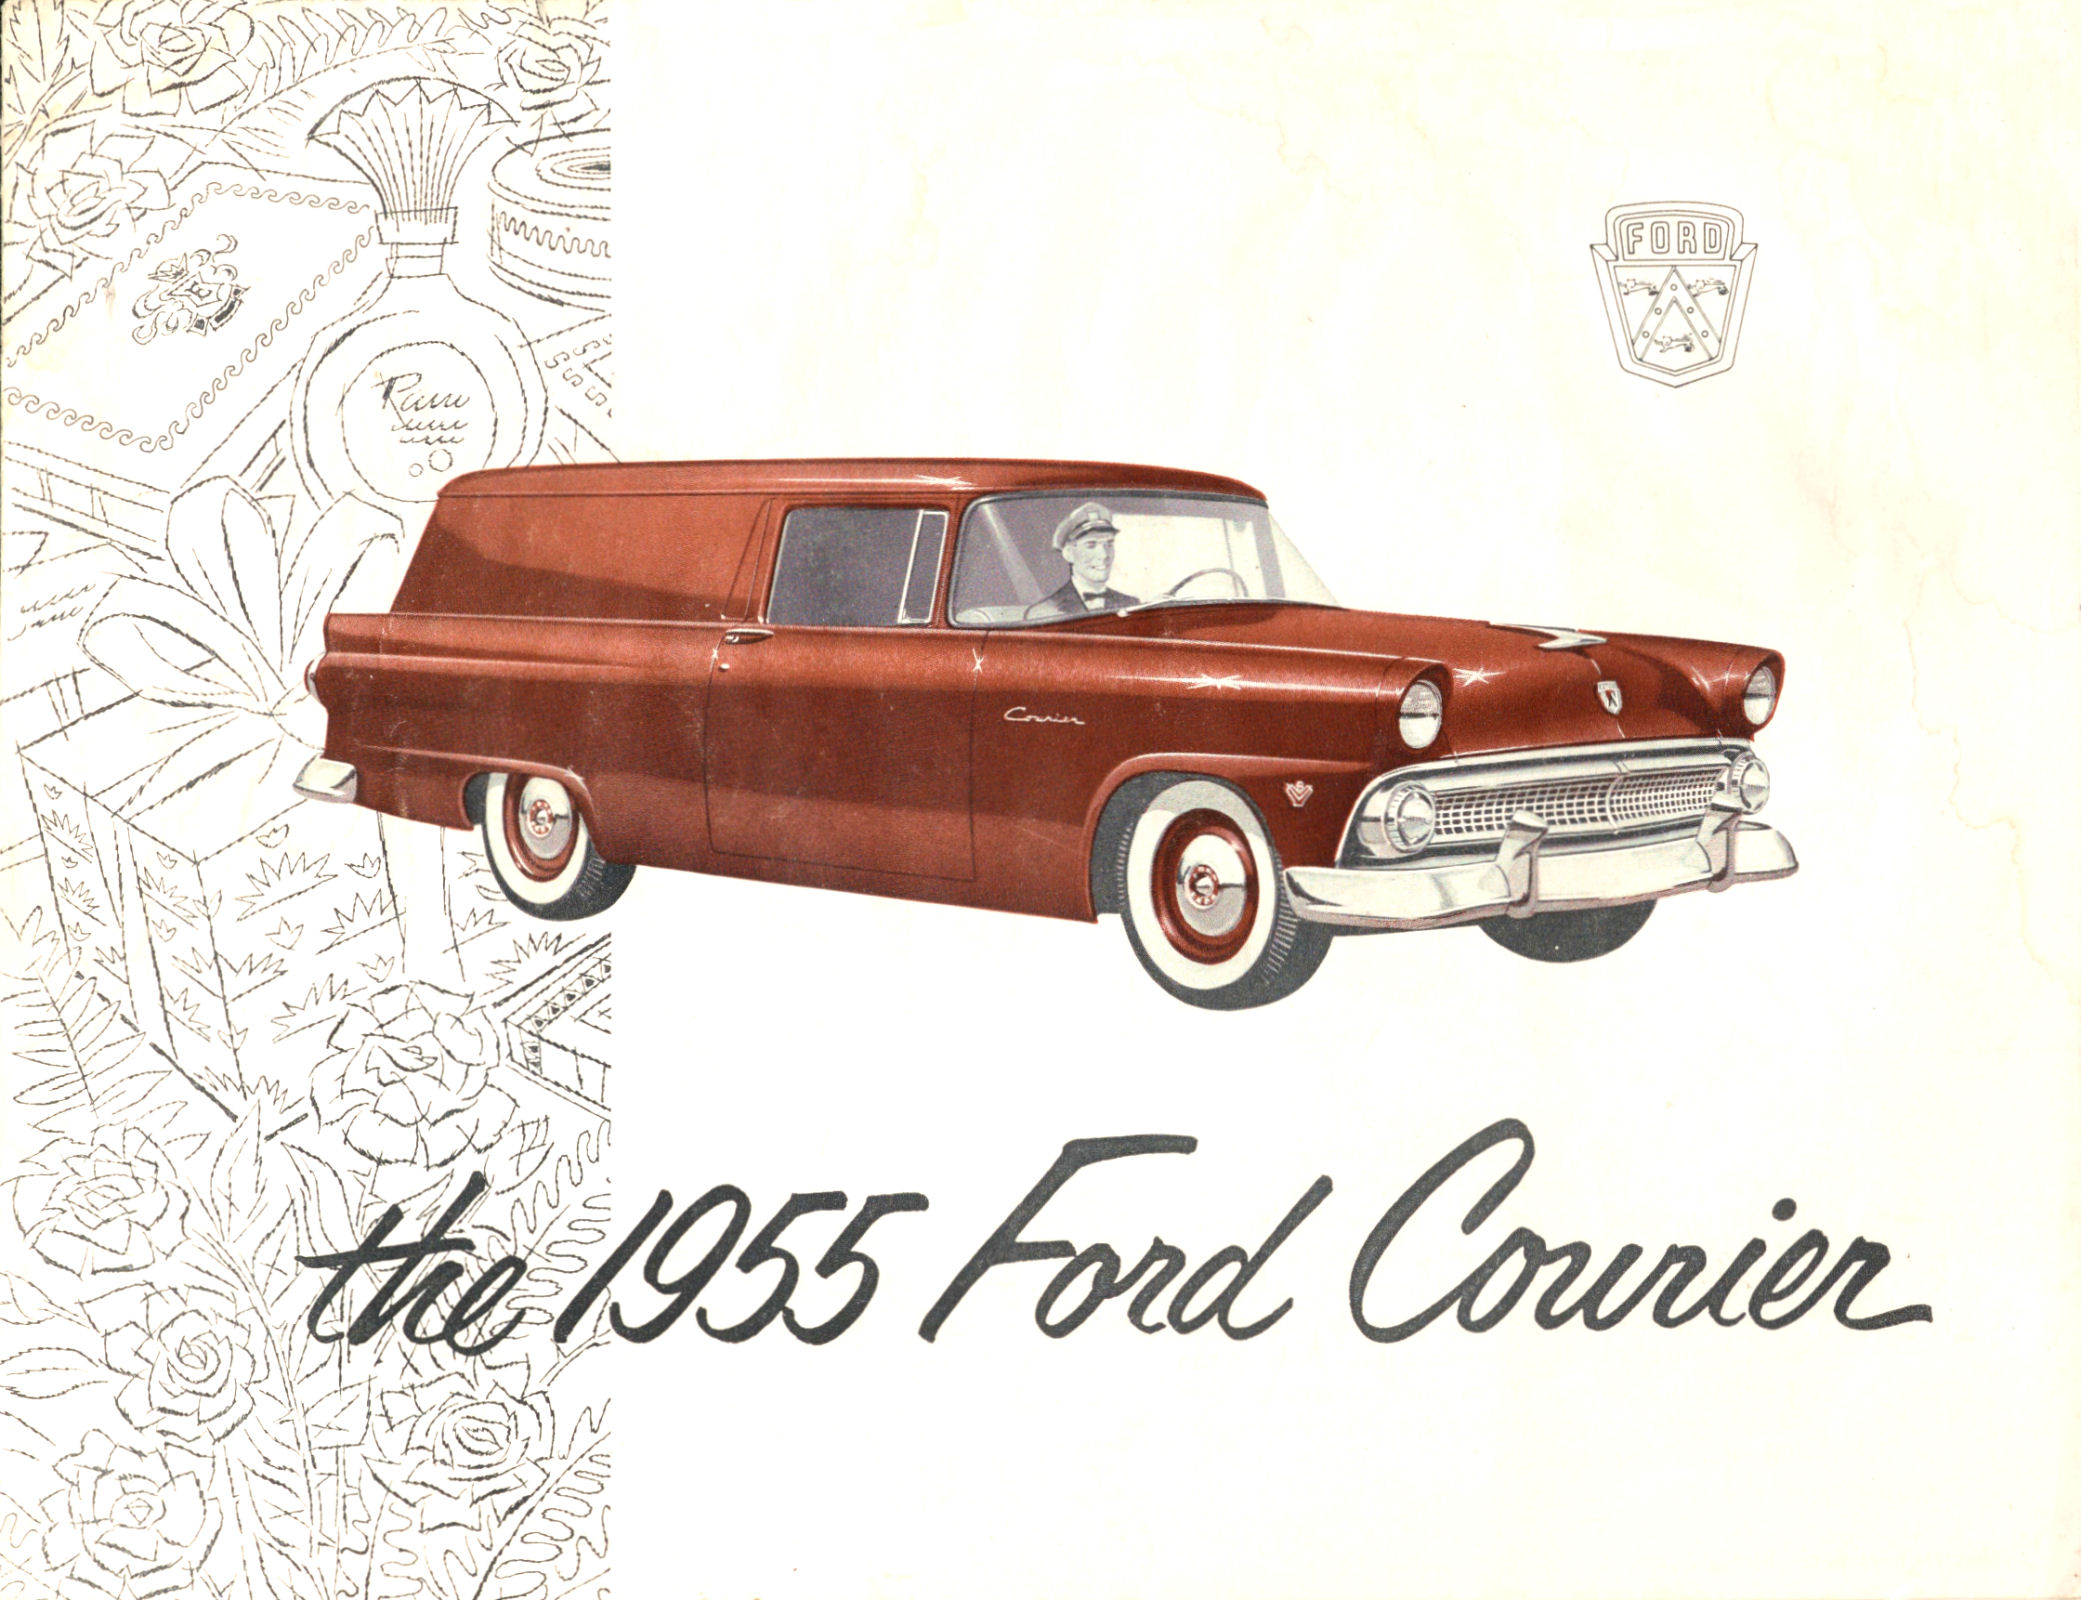 1955 Ford Courier-01